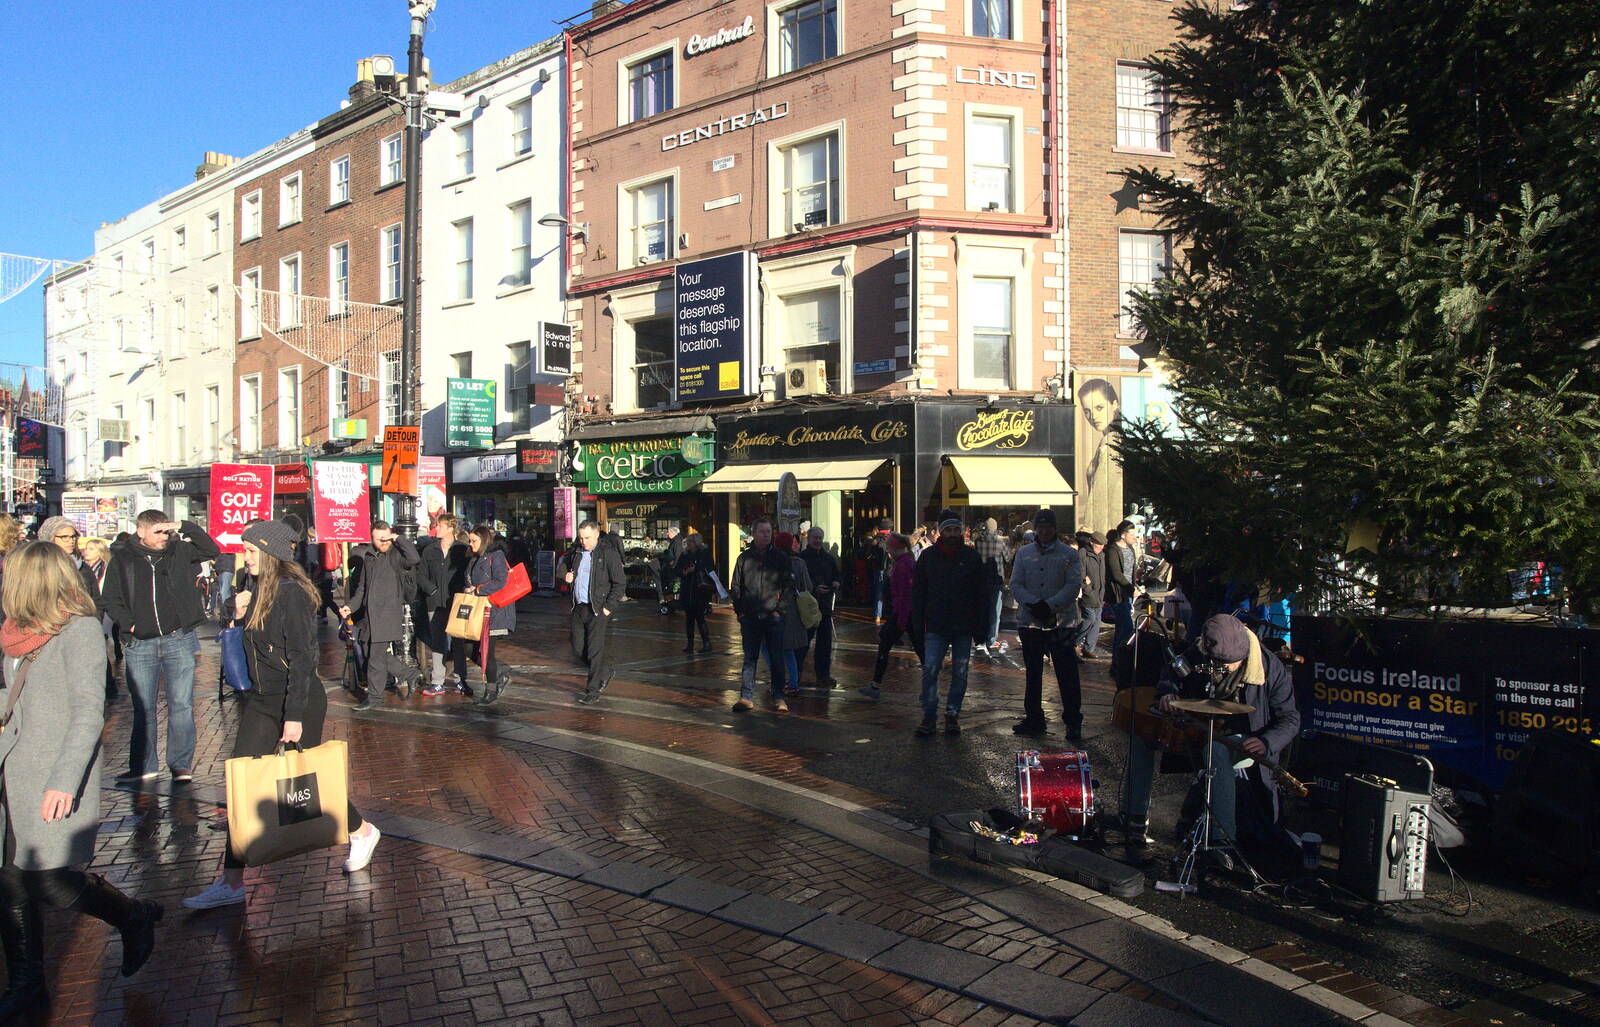 The end of Grafton Street from Christmas Eve in Dublin and Blackrock, Ireland - 24th December 2015